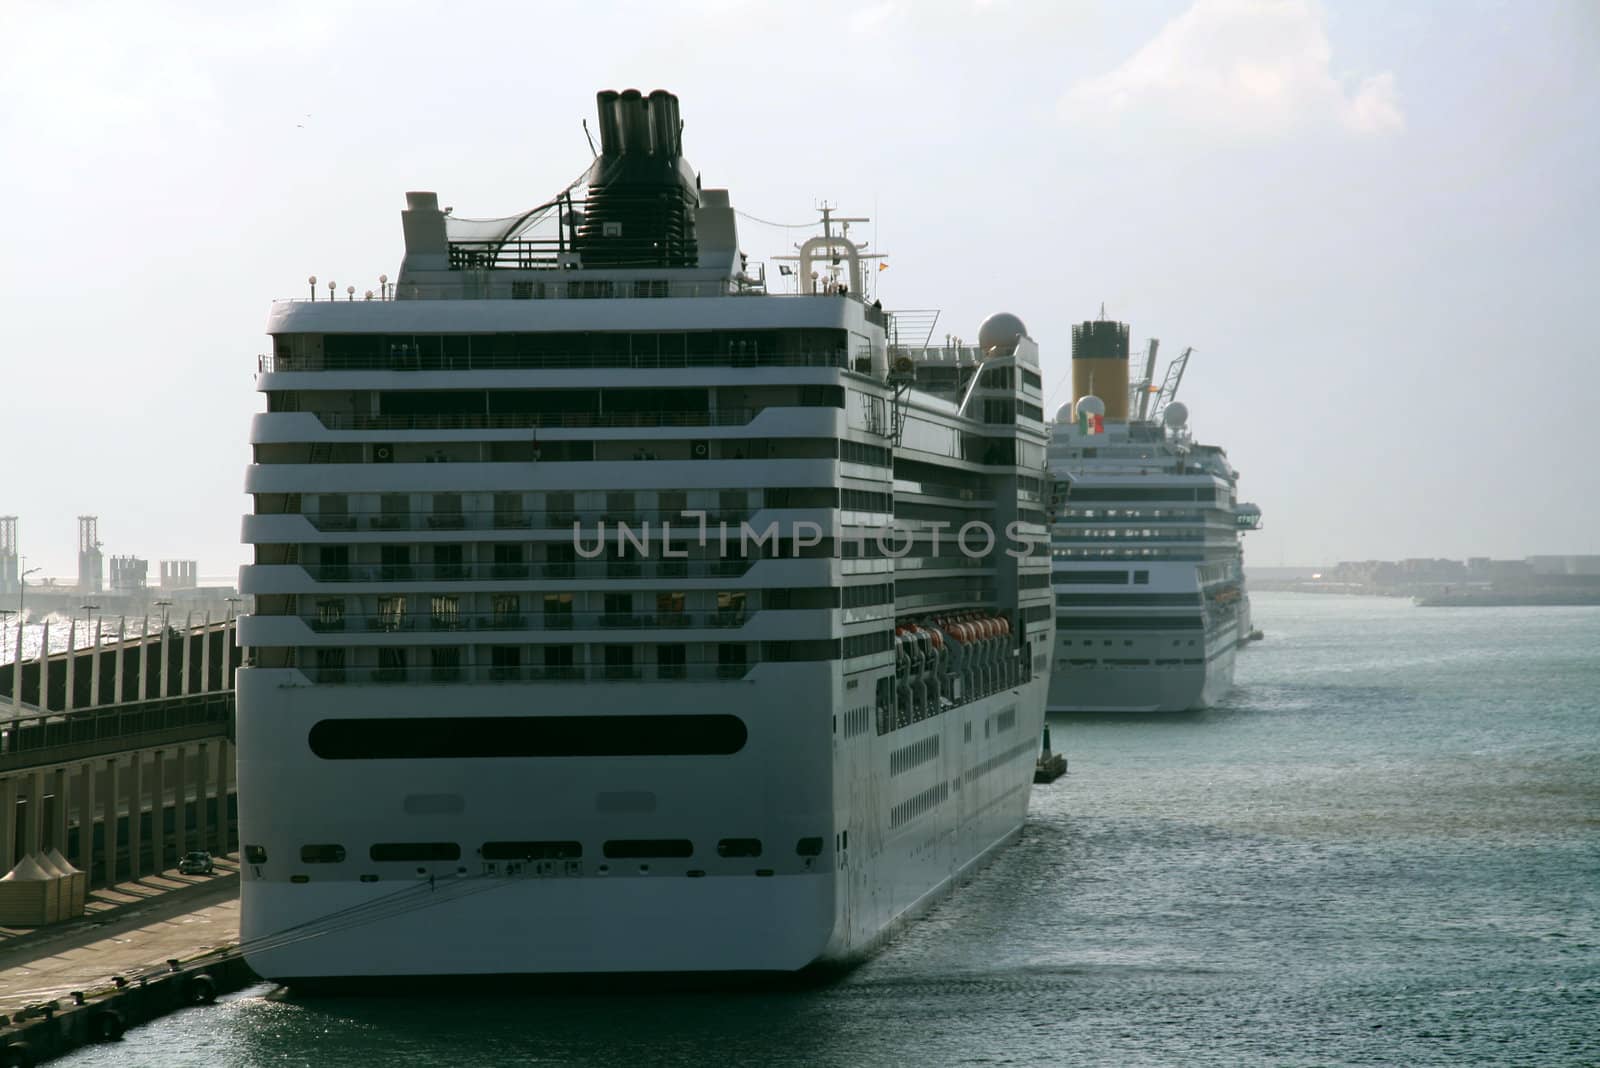 Two big cruises waiting in the port for a pleasure travel
